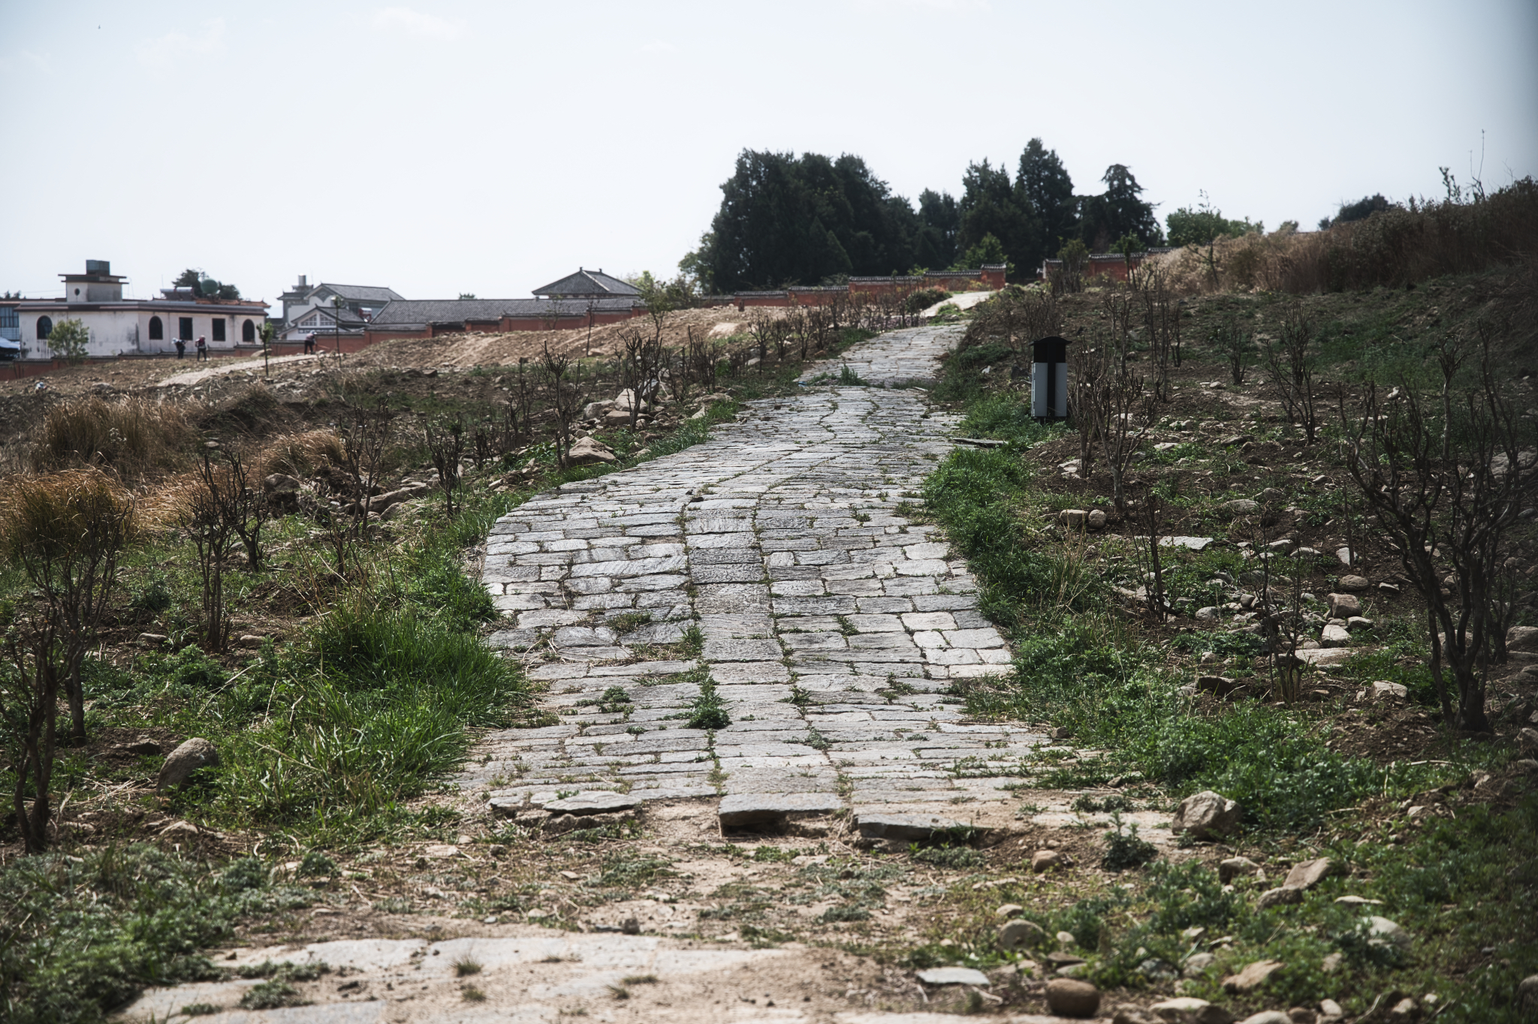 Picture: A stretch of old road inside the Taihe ruin area.